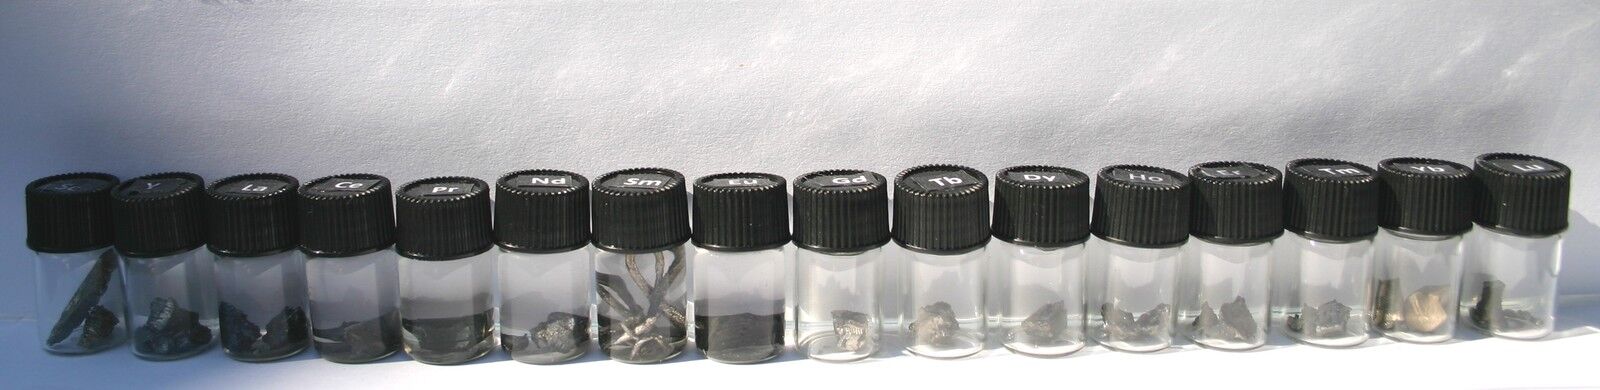 Set of 16 rare earth metals - periodic table element samples in vials 